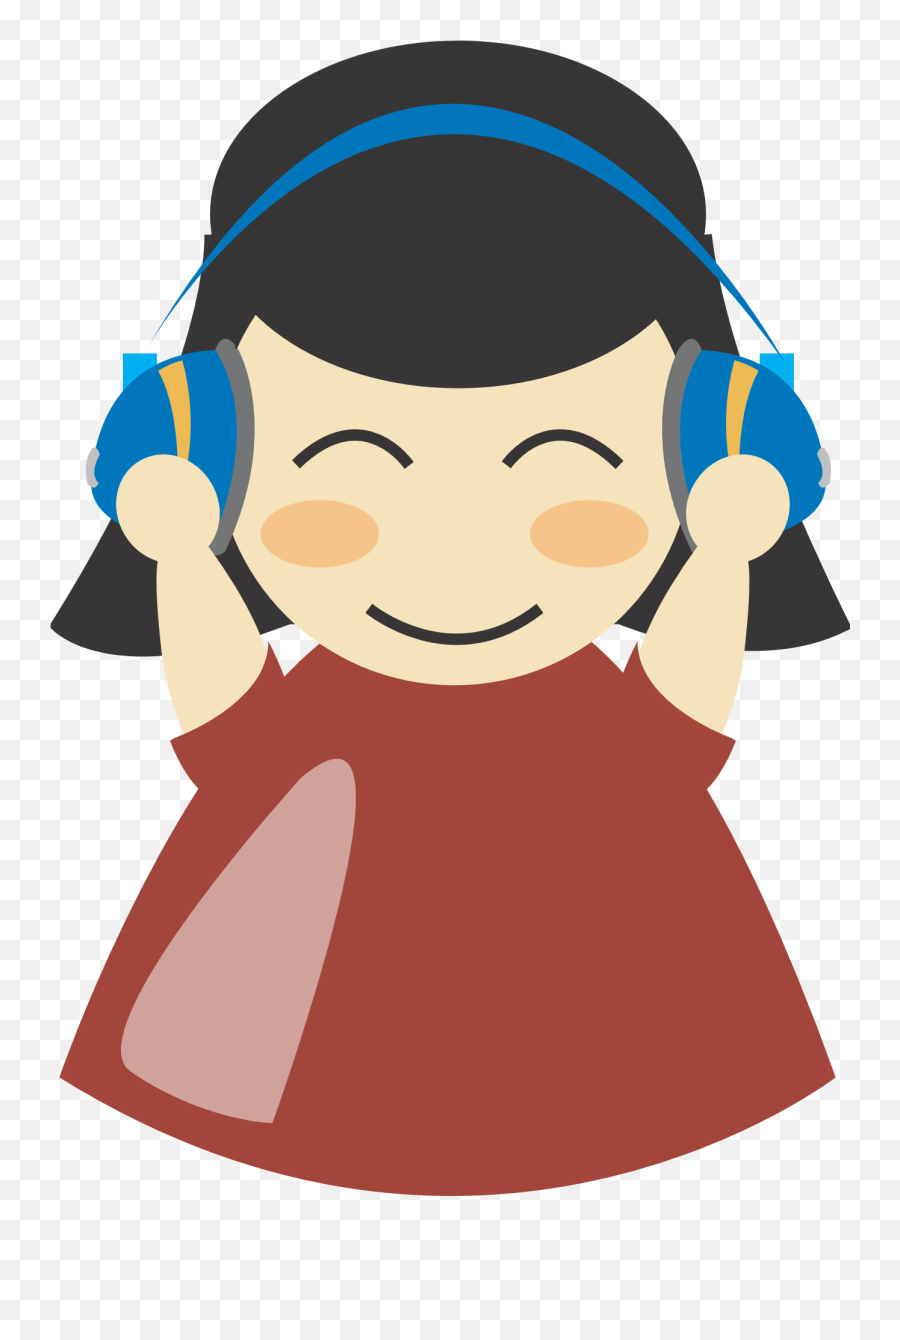 Funny Girl With Earphones As An Illustration Free Image Download Emoji,Listen To Music Clipart